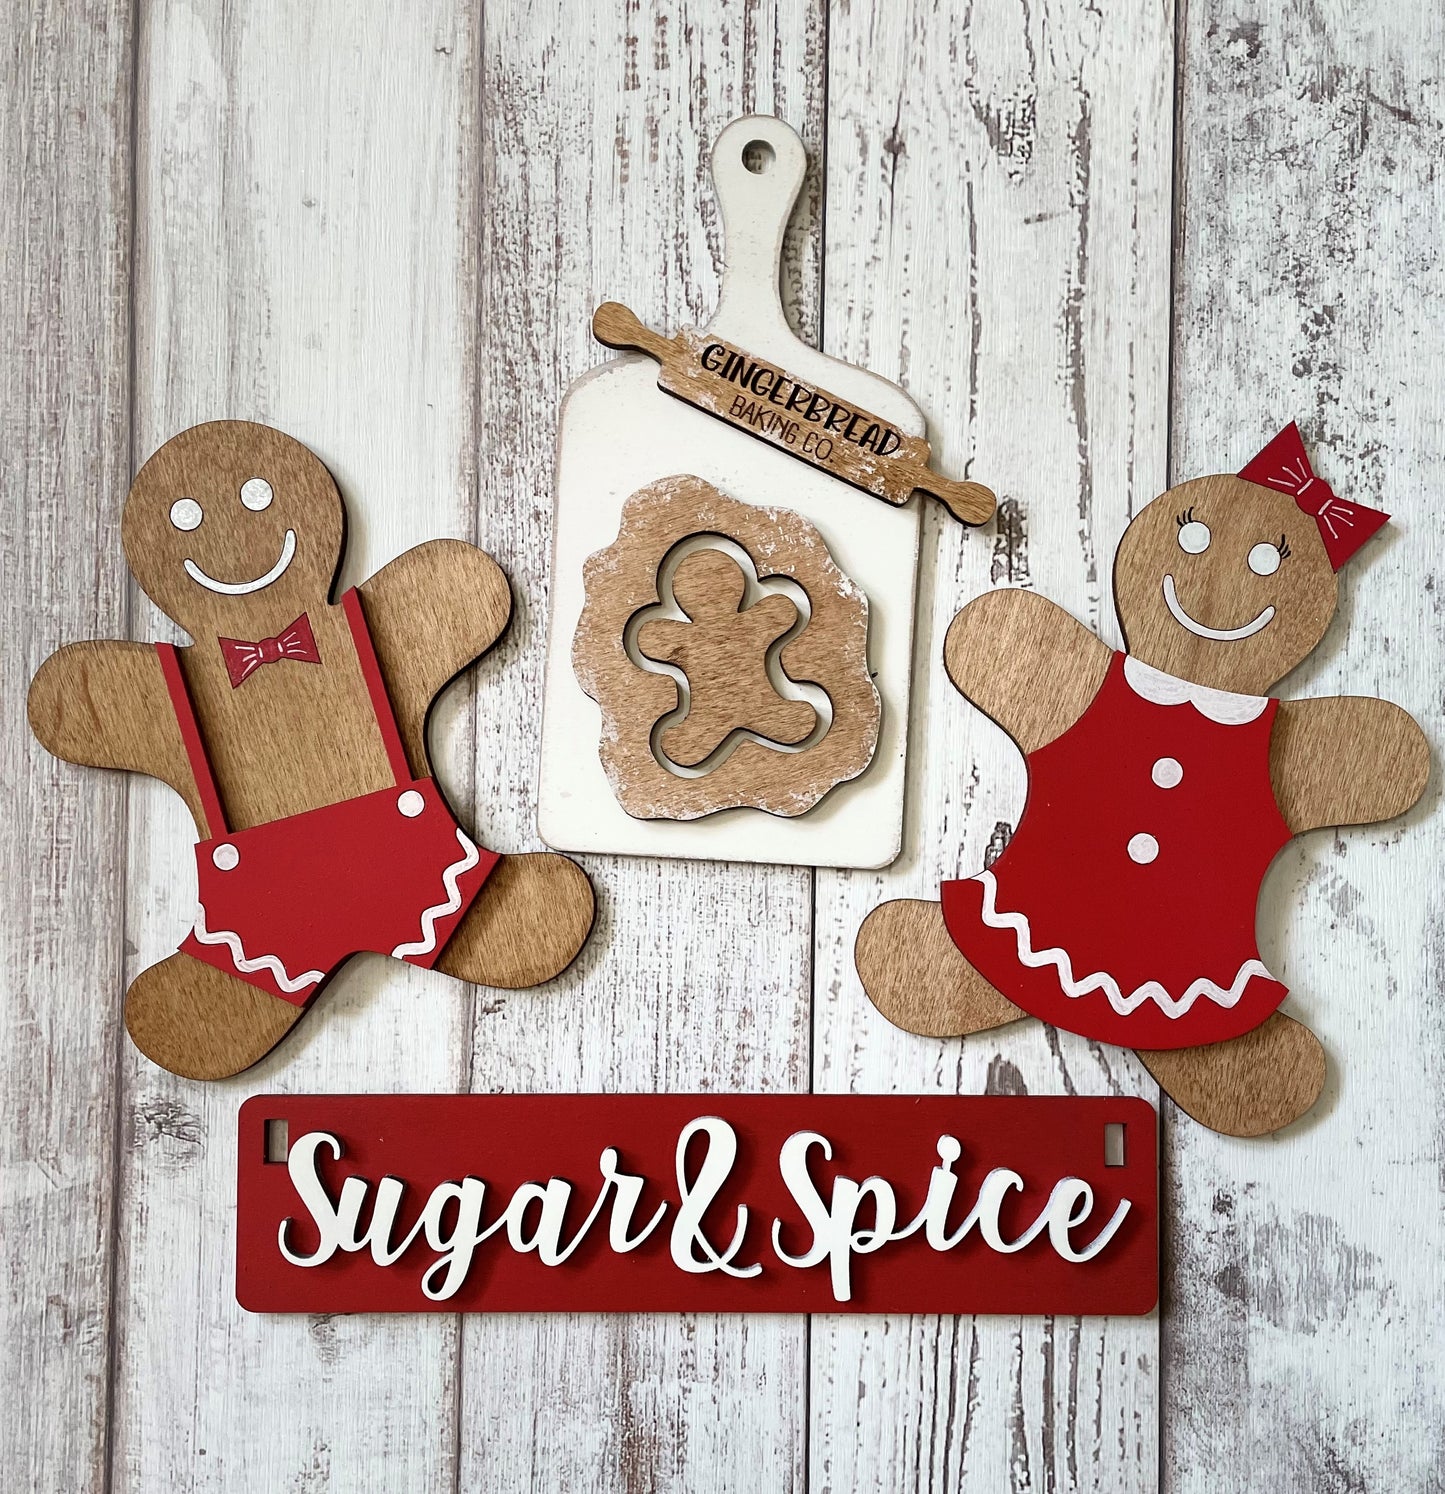 Sugar & Spice Gingerbread Interchangeable Set for Wagon/Crate/Raised Shelf